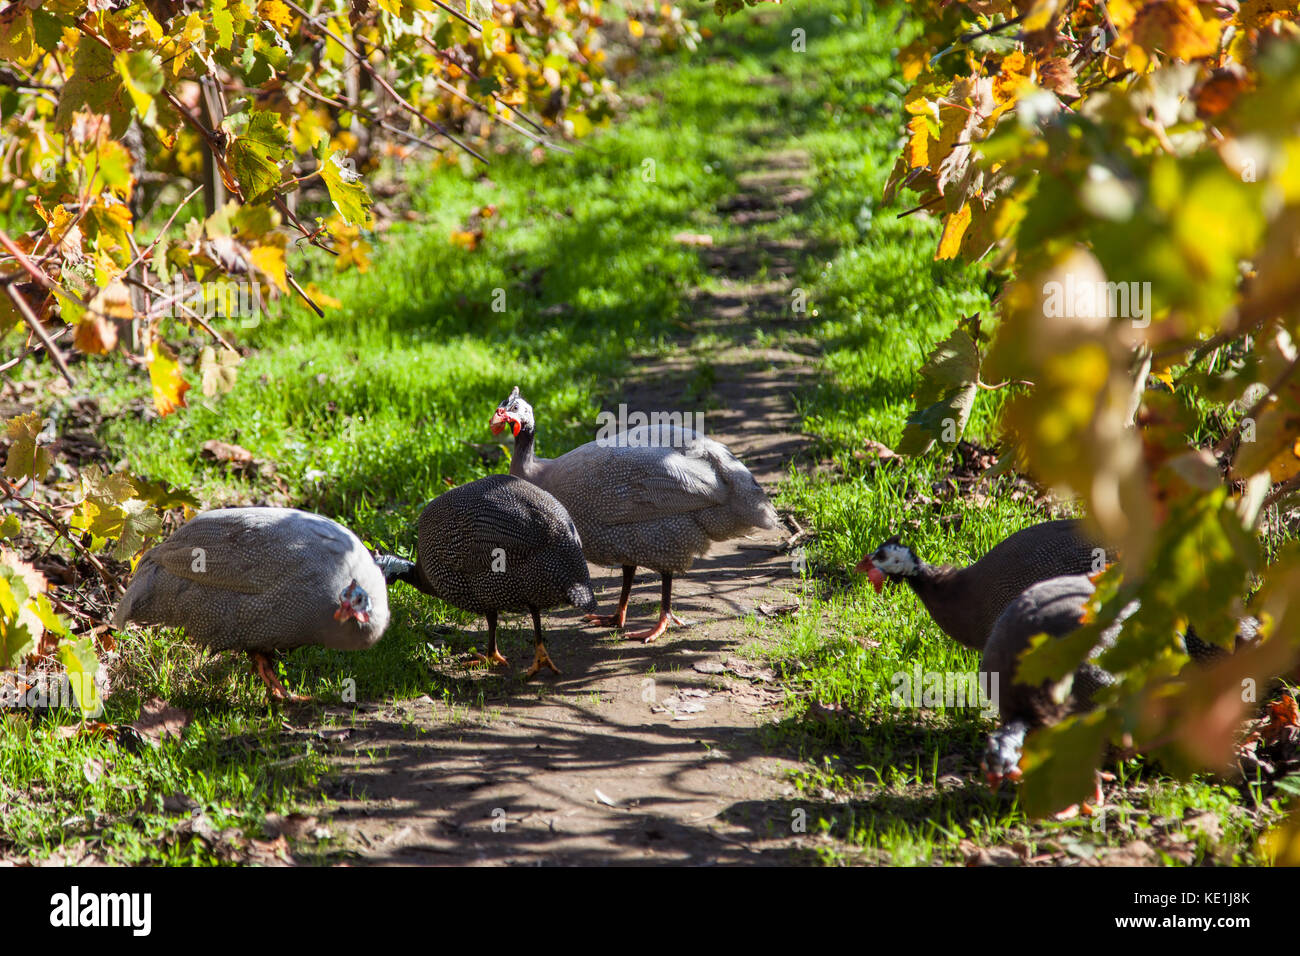 A group of Guiena fowl or chickens are eating seeds and bugs in a vineyard in the fall. Stock Photo